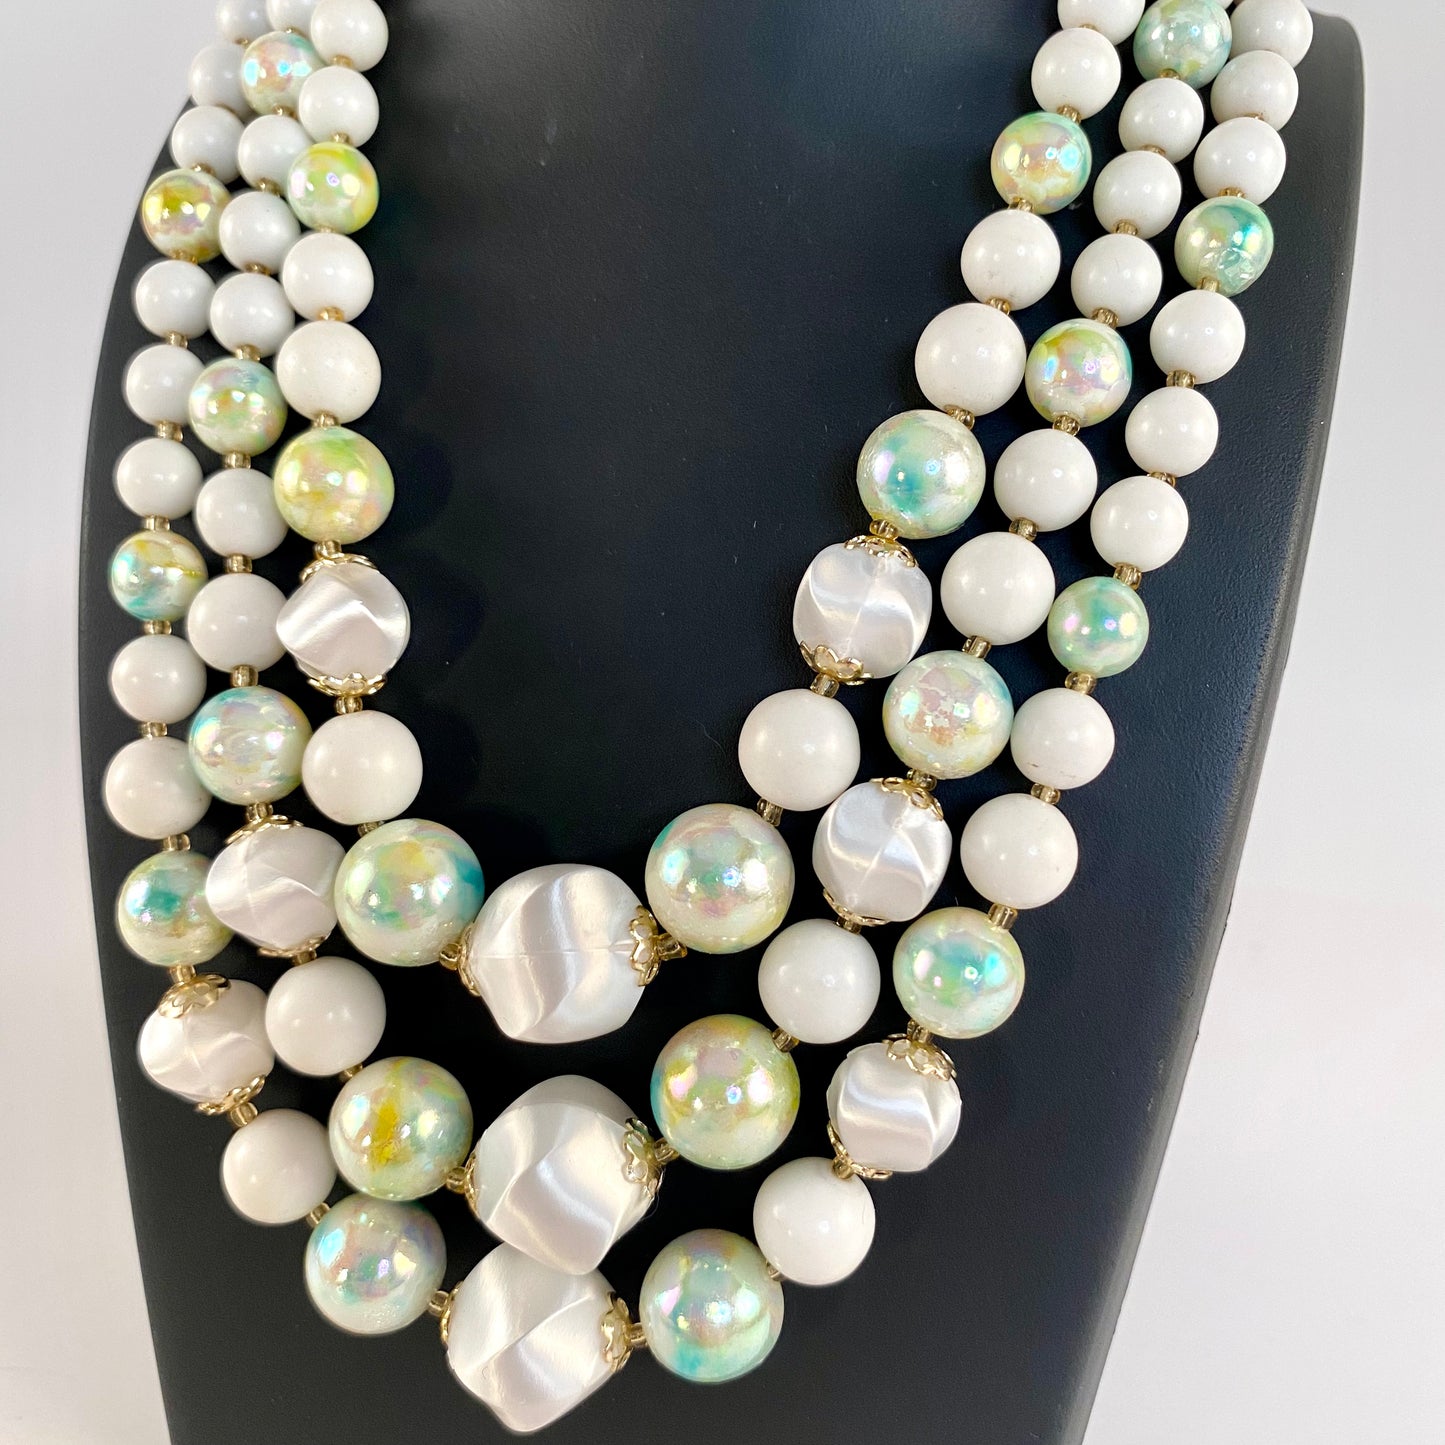 1960s Japan 3-Strand Bead Necklace